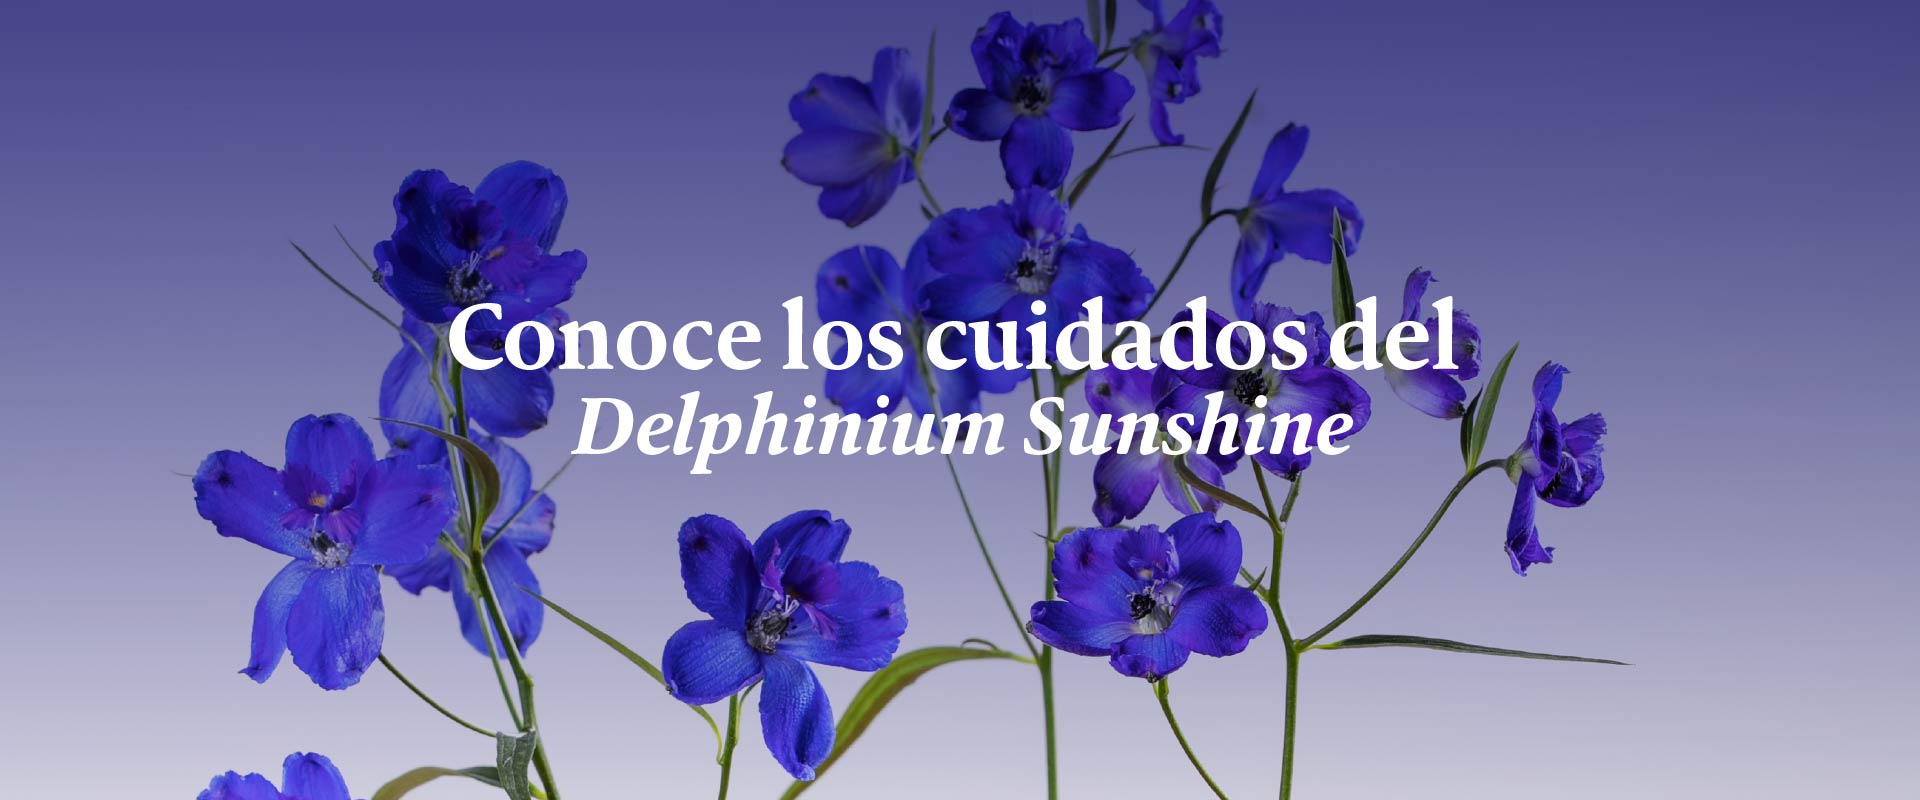 Don't cut it out! What do you know about Delphinium Sunshine care?